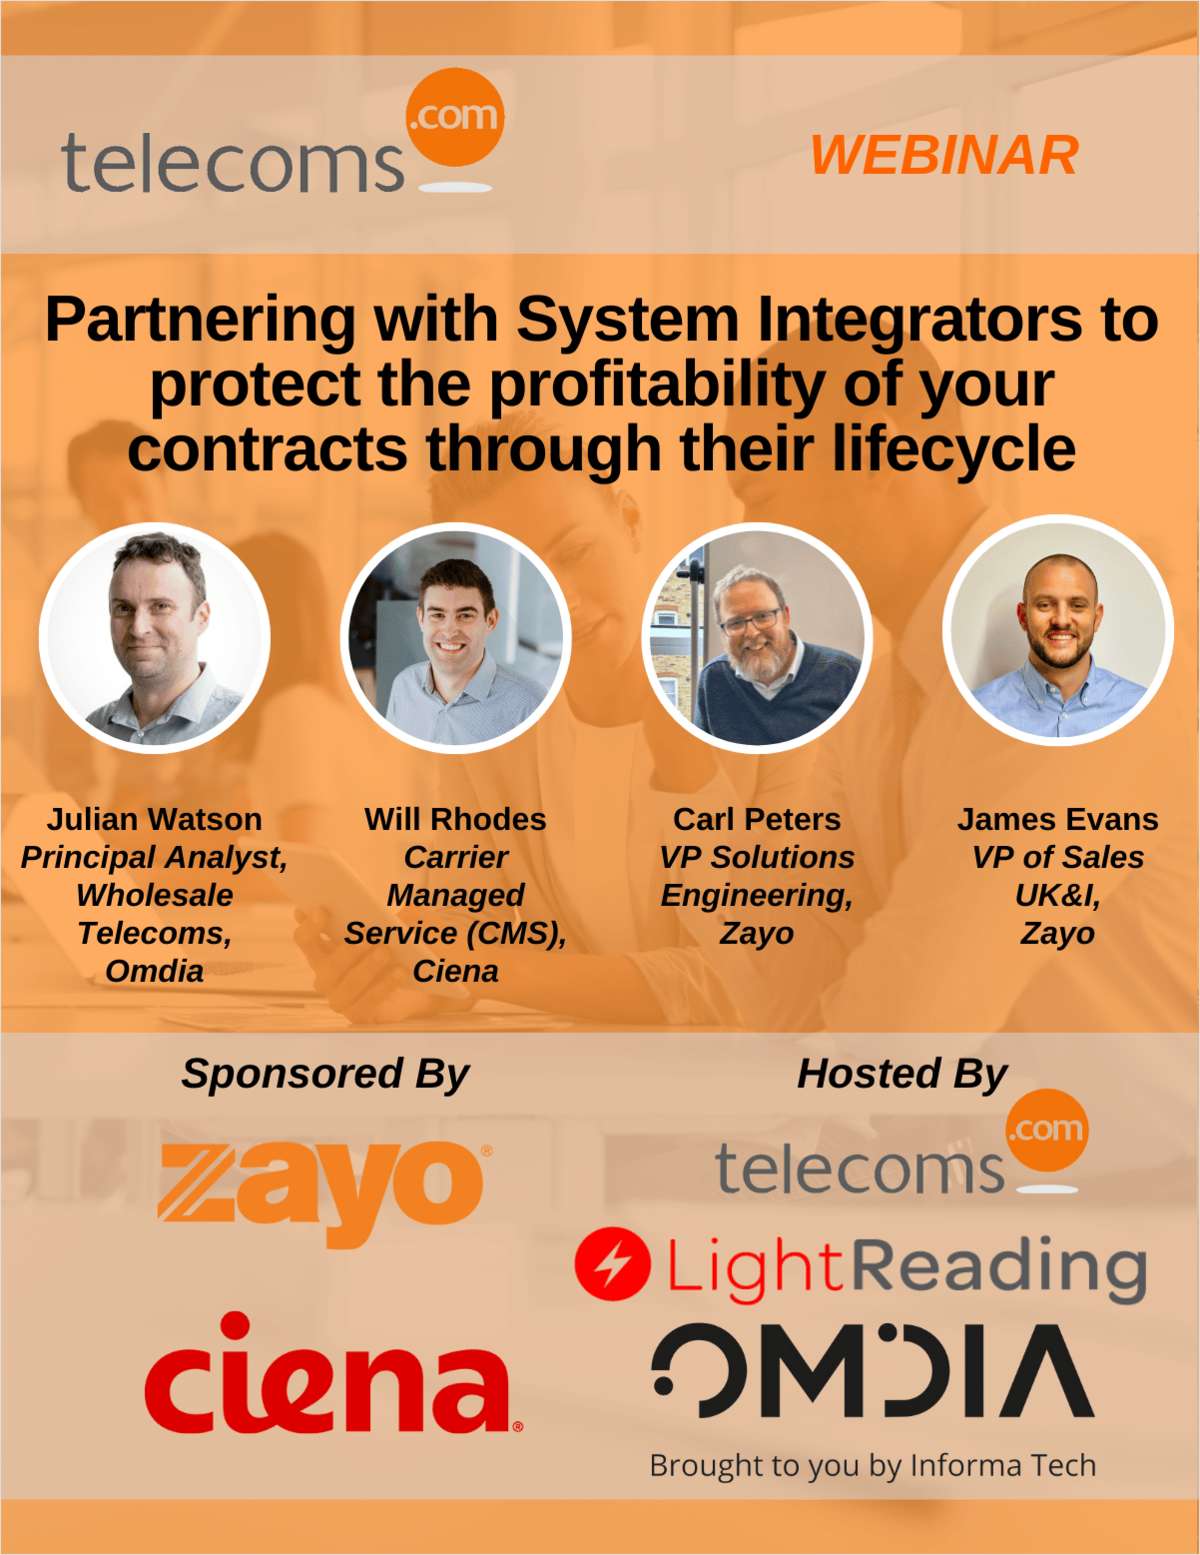 Partnering with System Integrators to protect the profitability of your contracts through their lifecycle